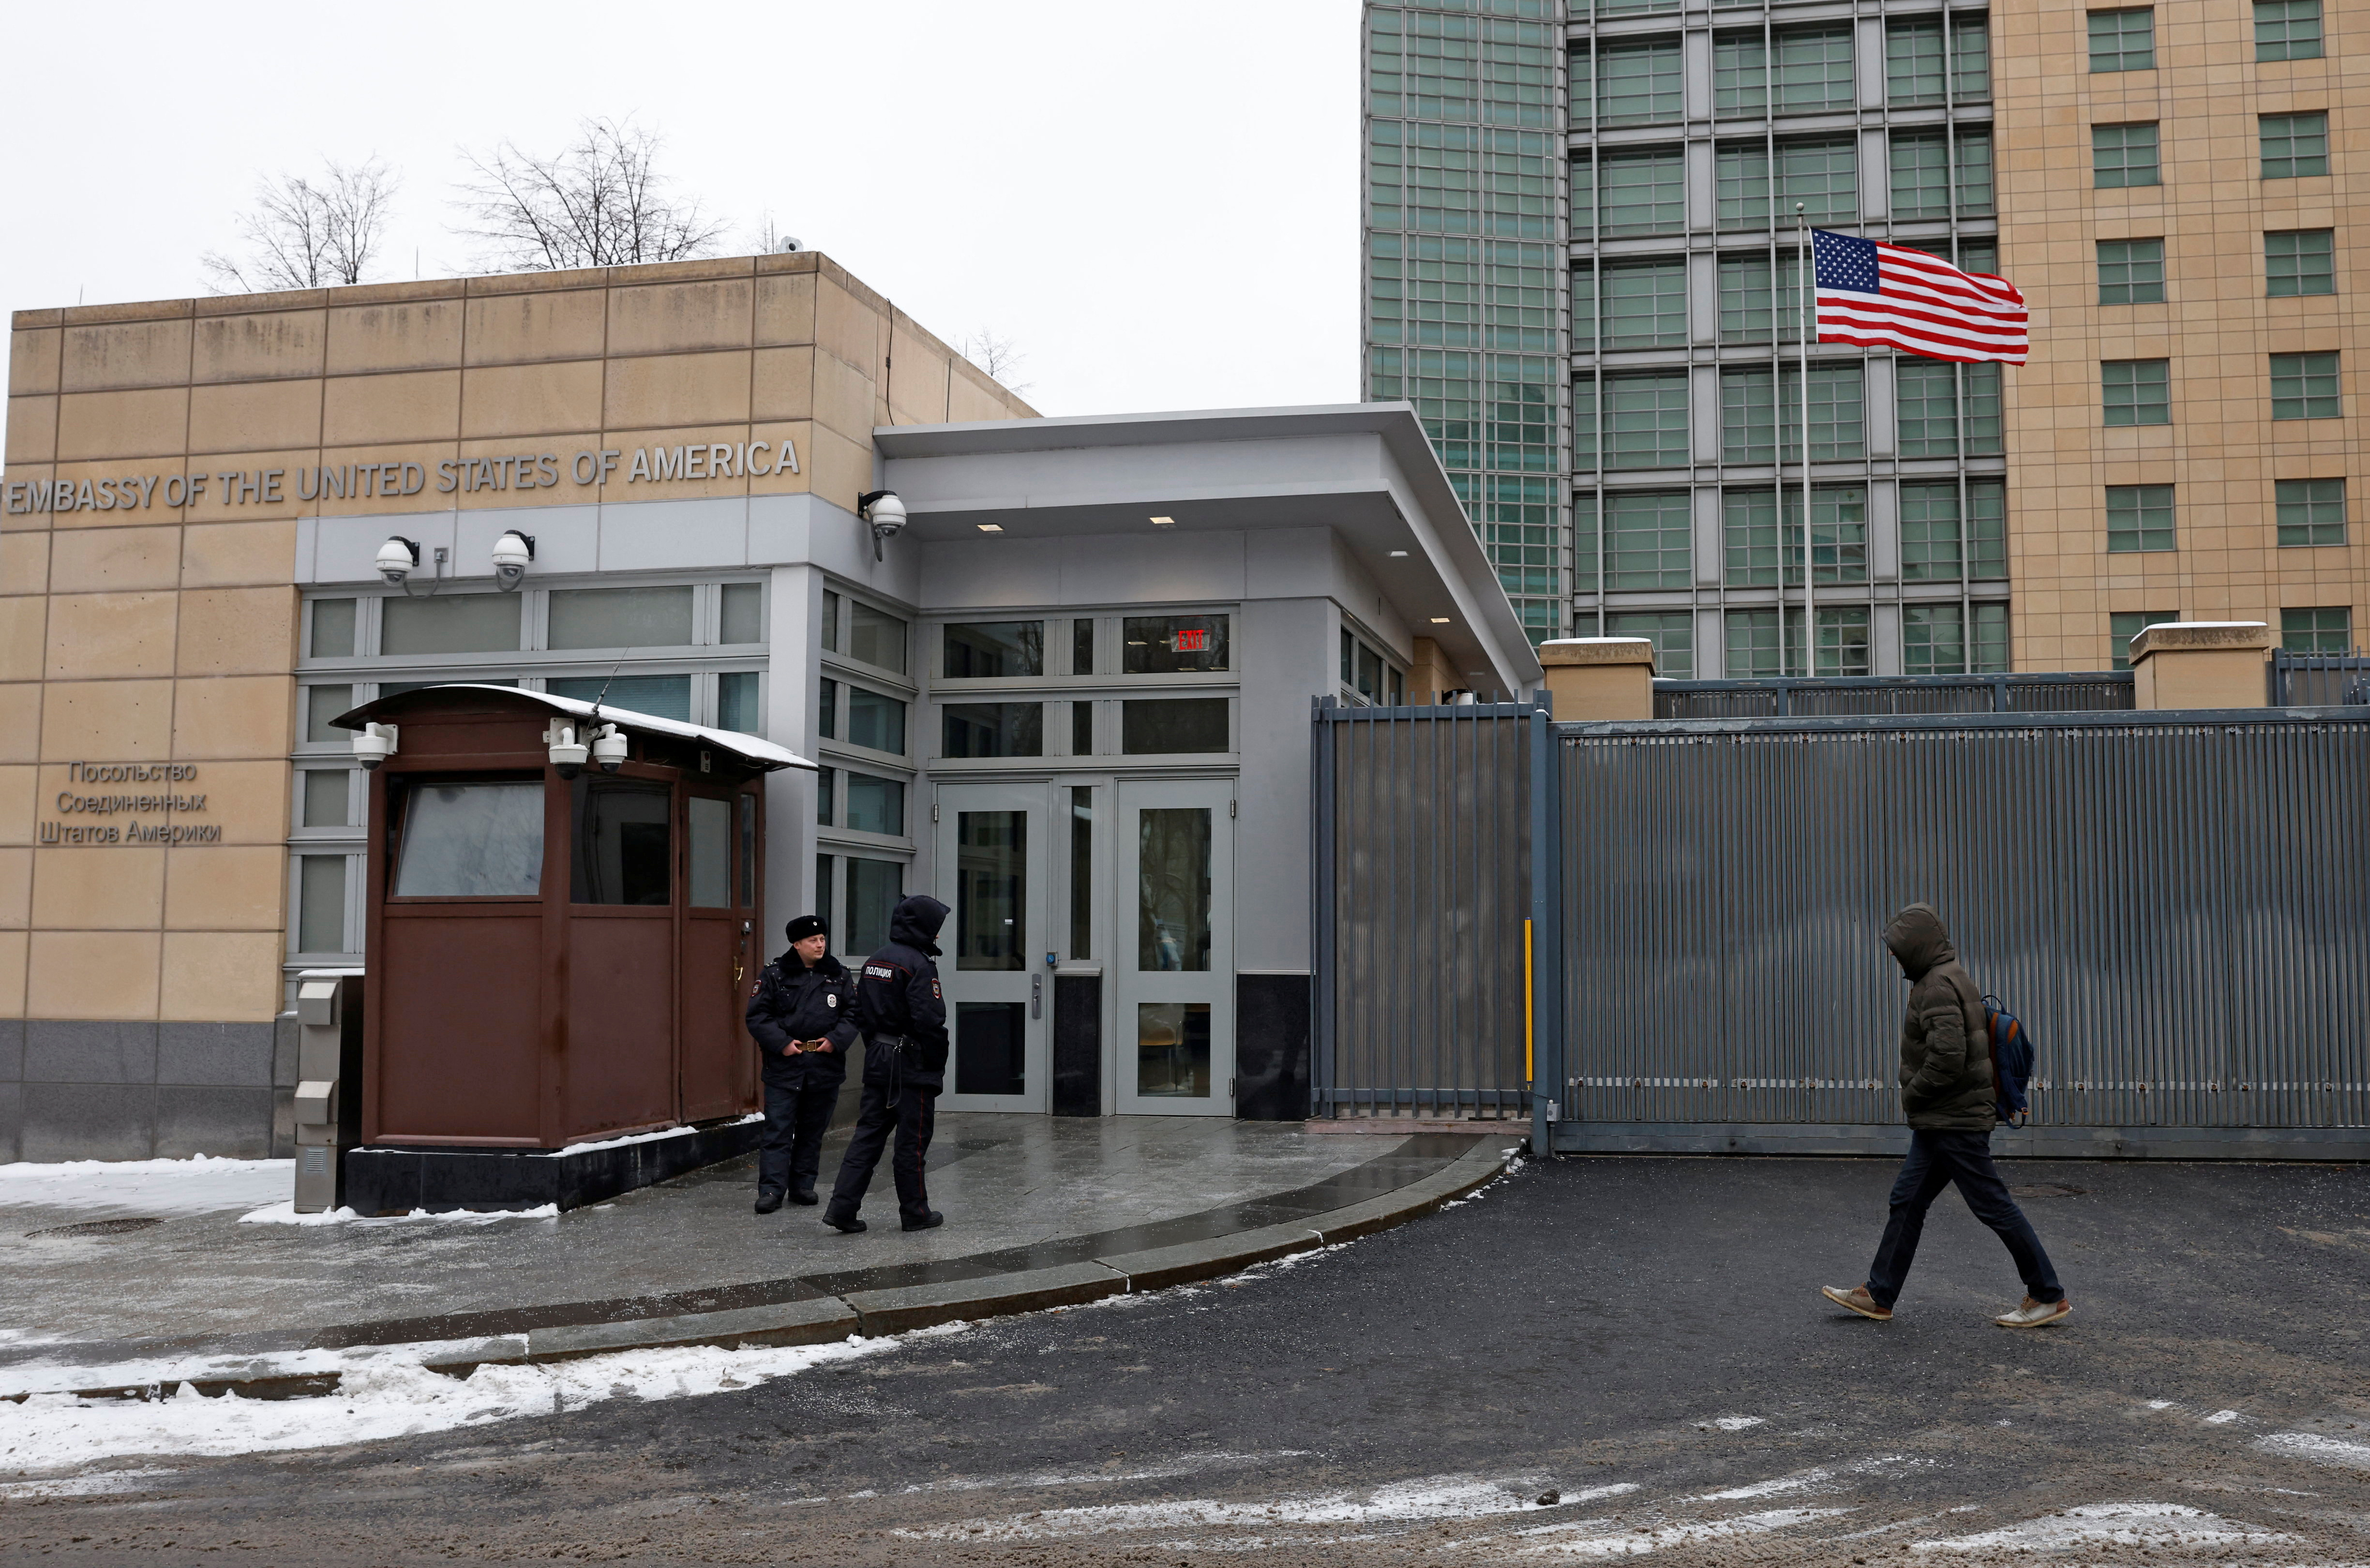 A man walks past the U.S. Embassy in Moscow